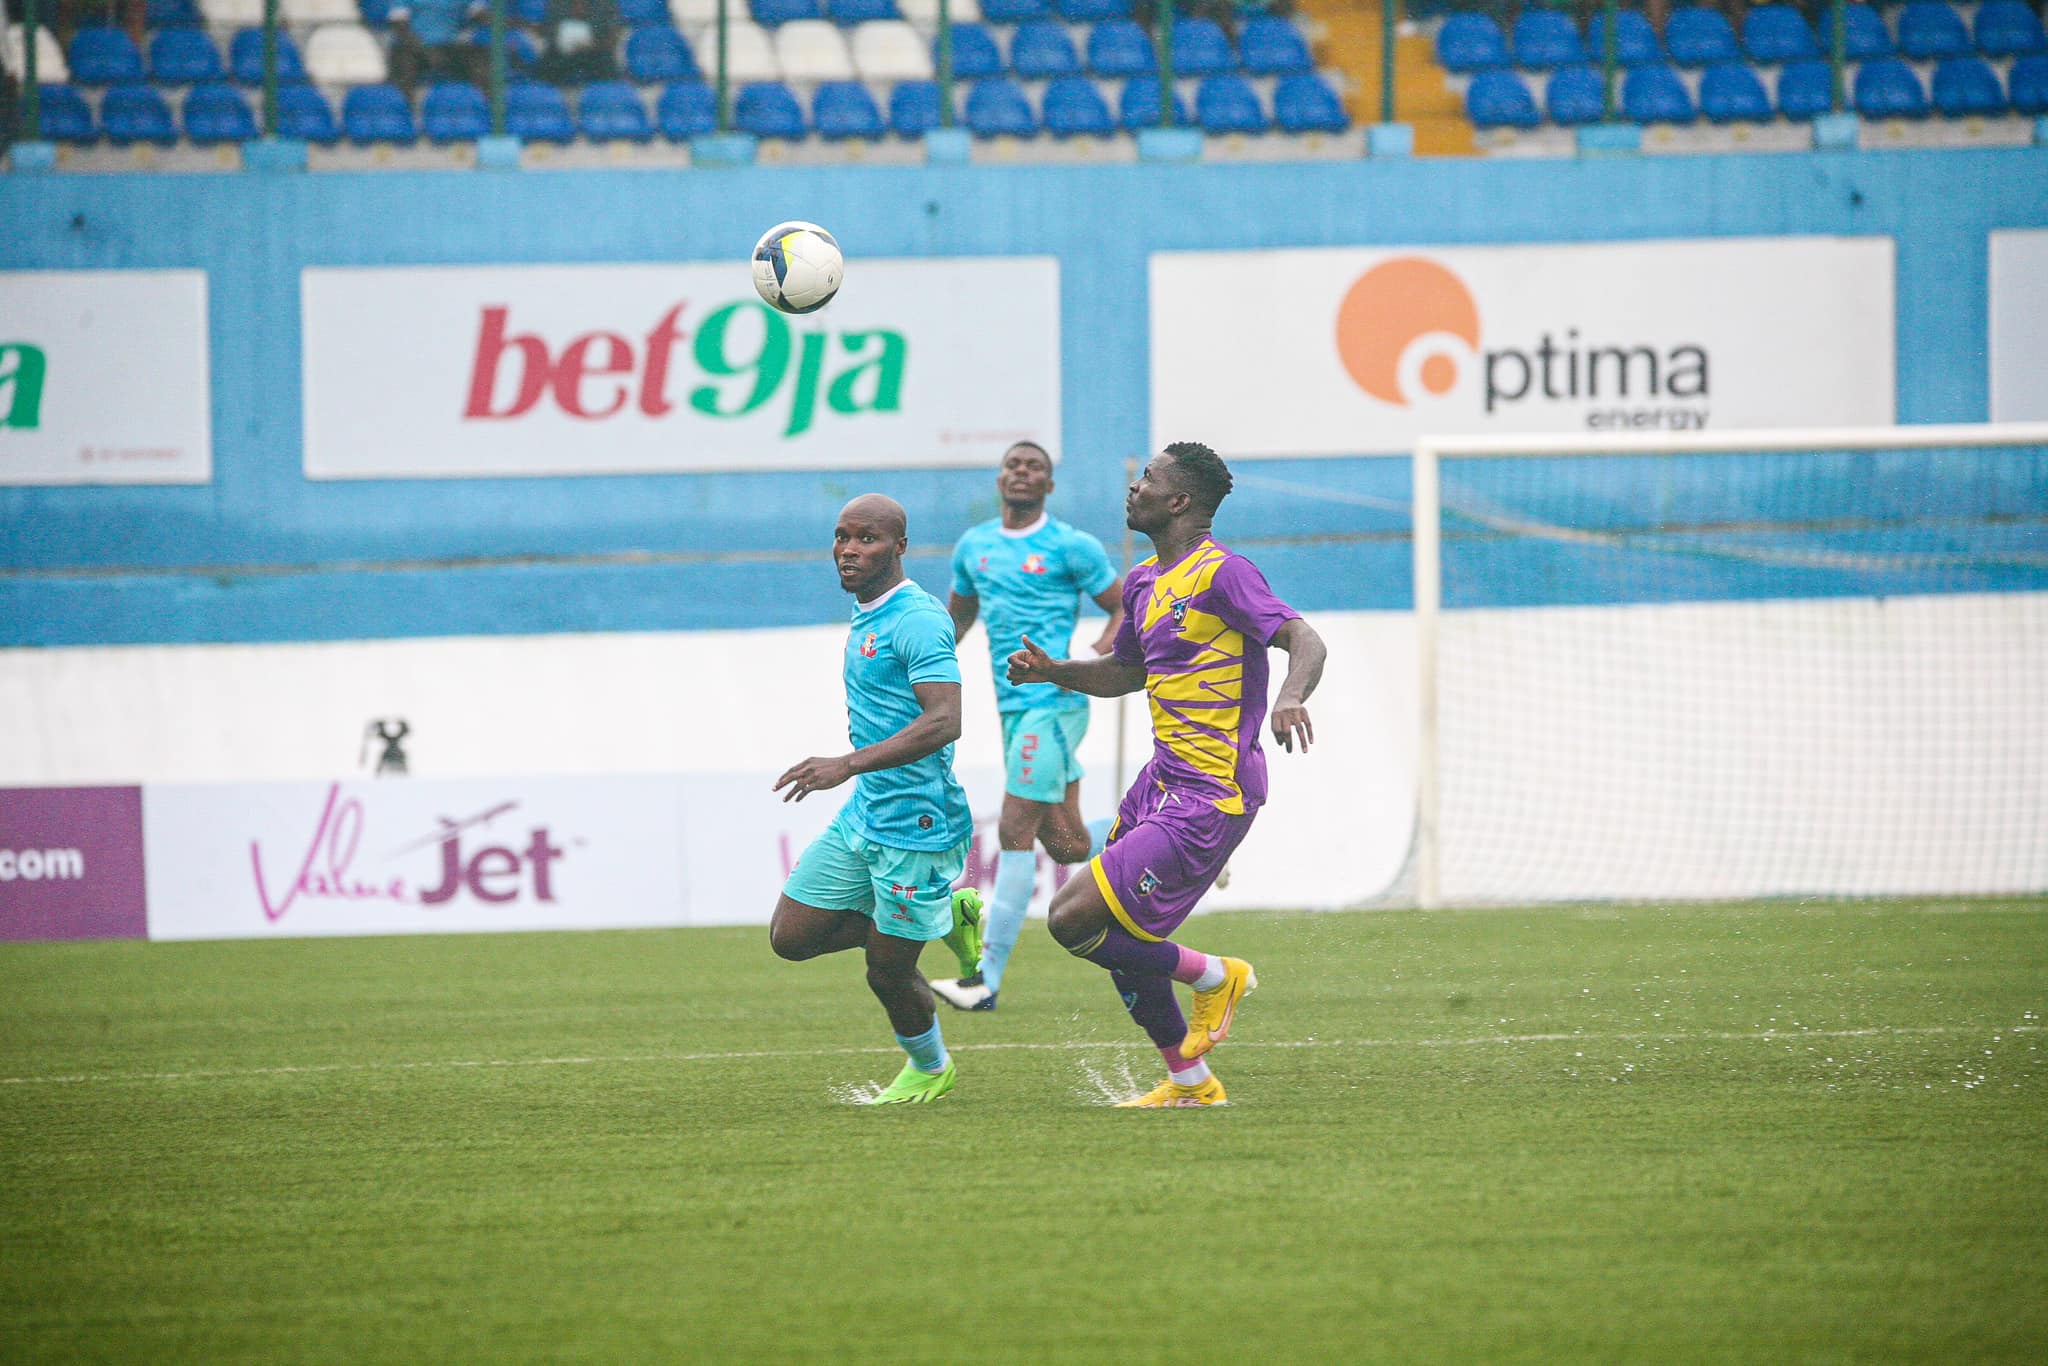 The team was prepared for penalties - Medeama assistant coach Stephen Pius